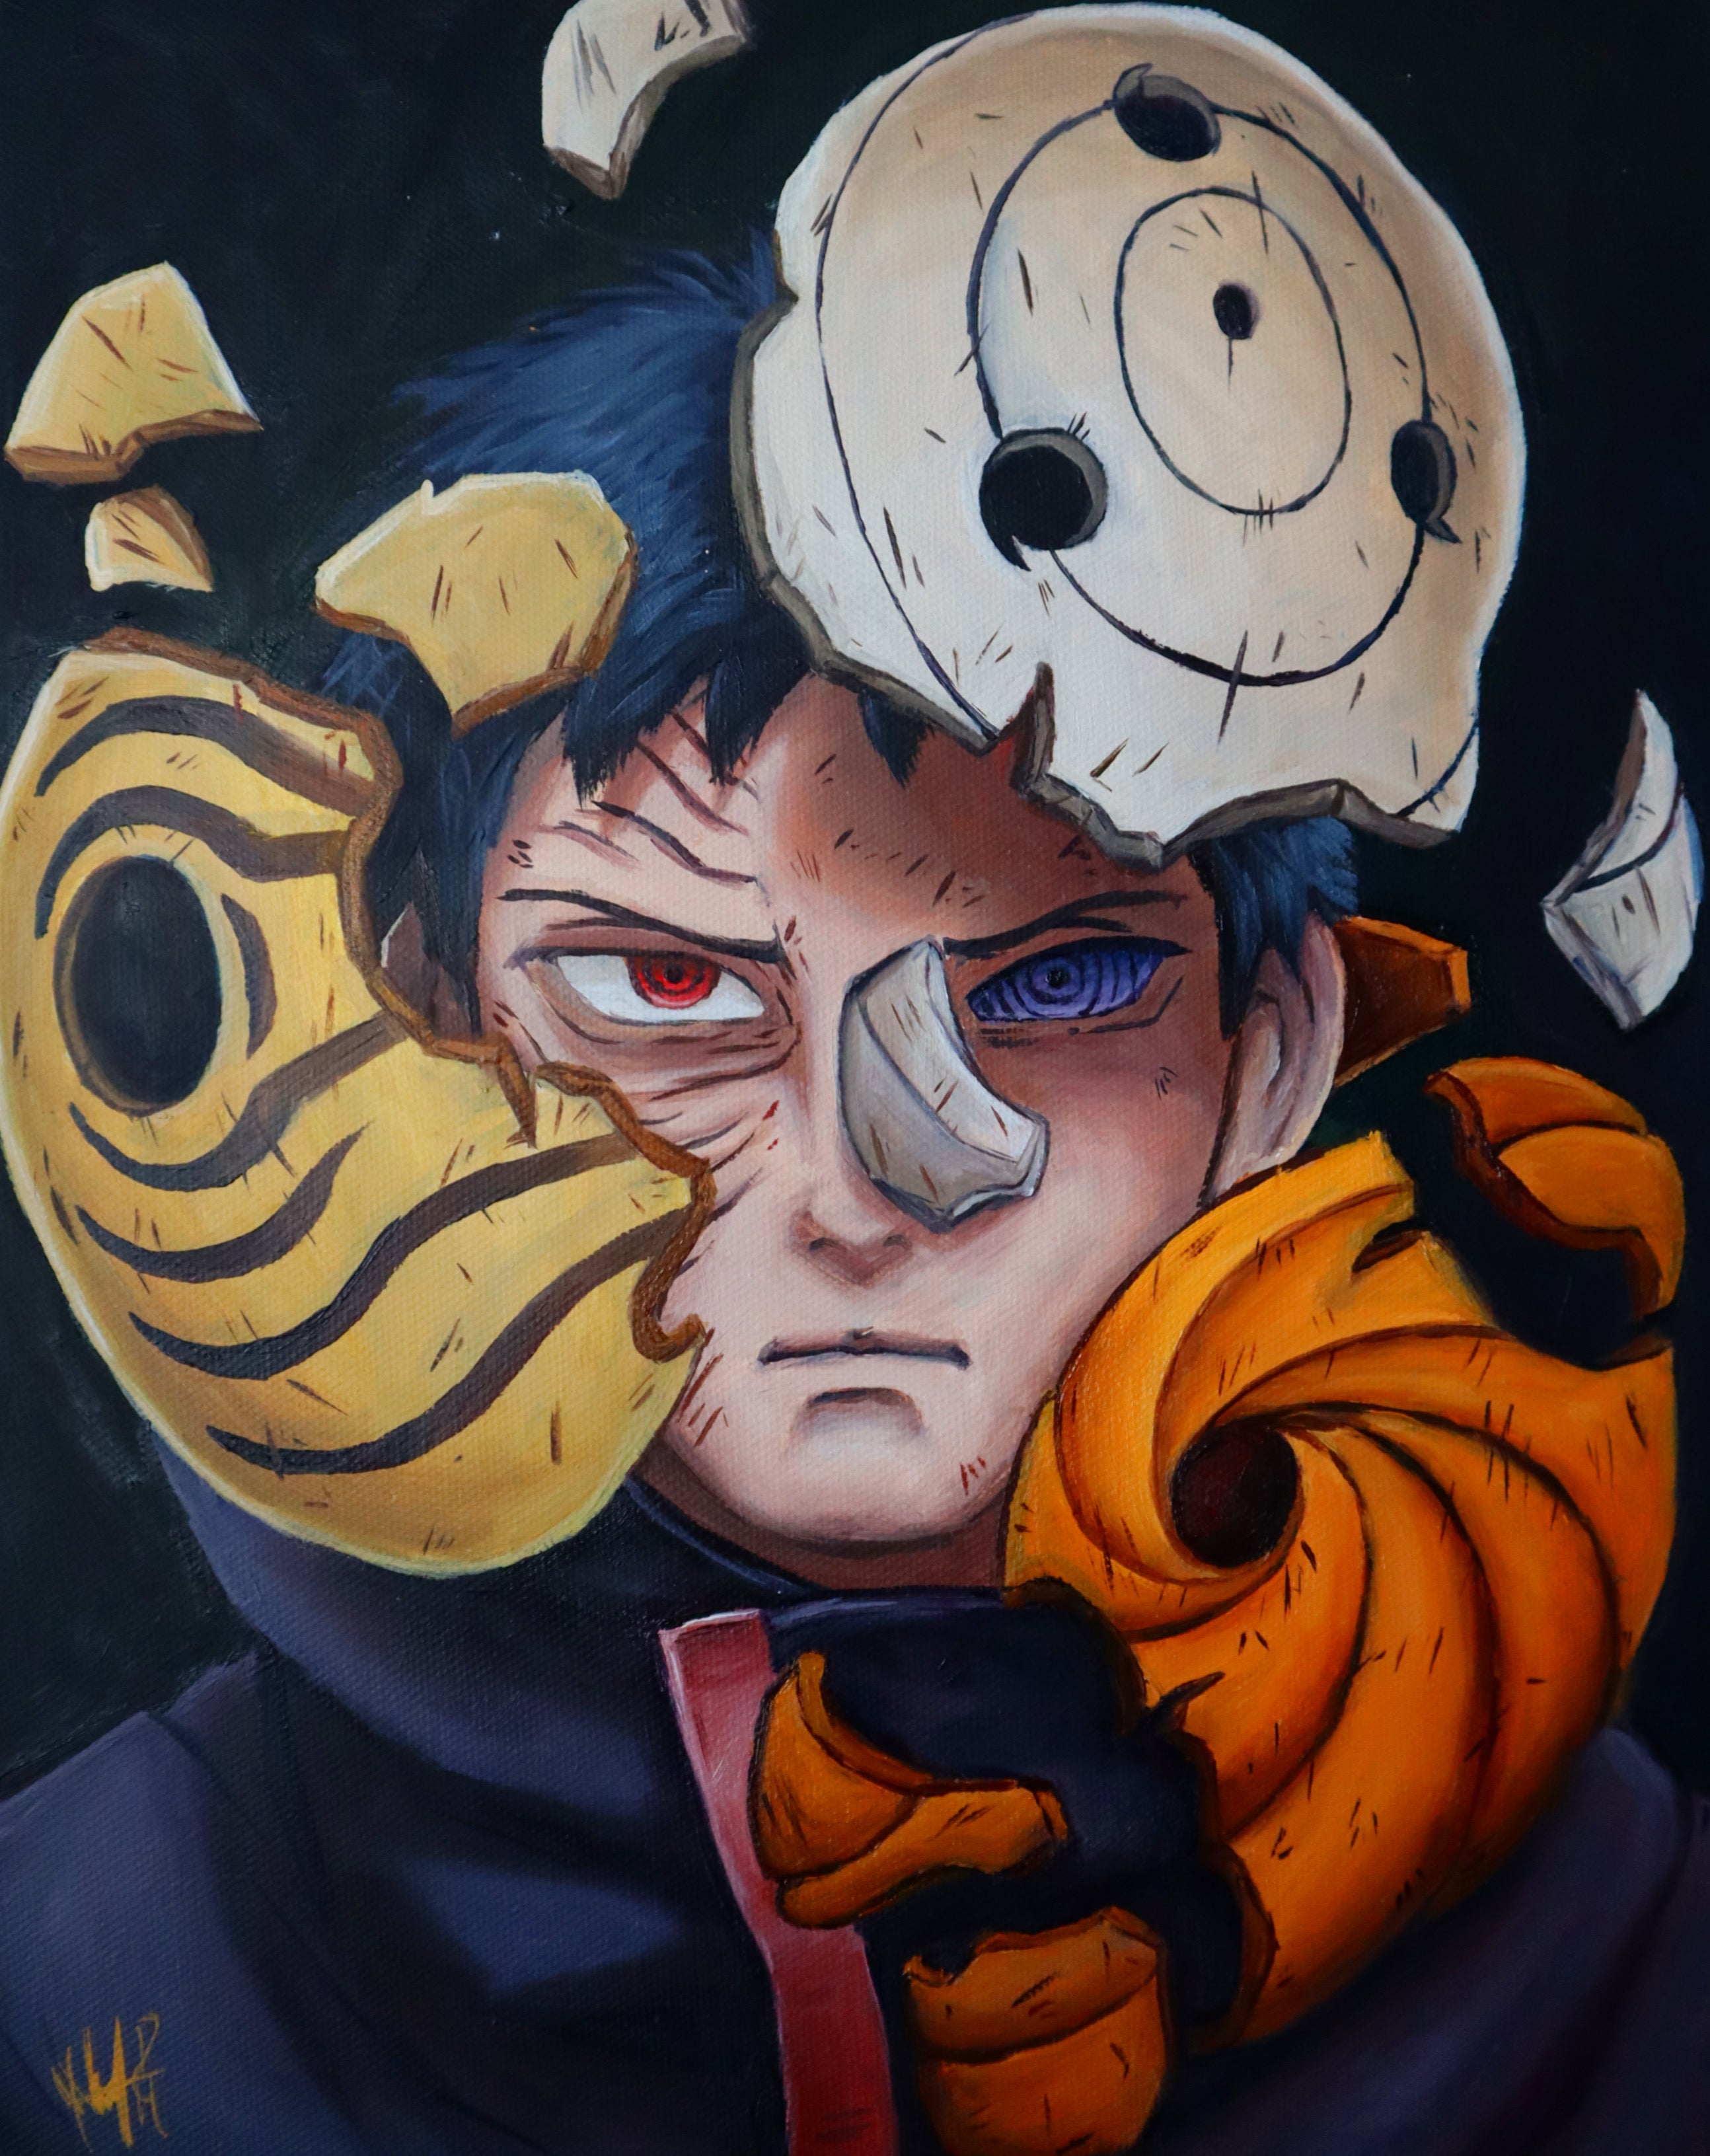 Anime Oil Paintings 3-5 by Lost-Illusions on DeviantArt